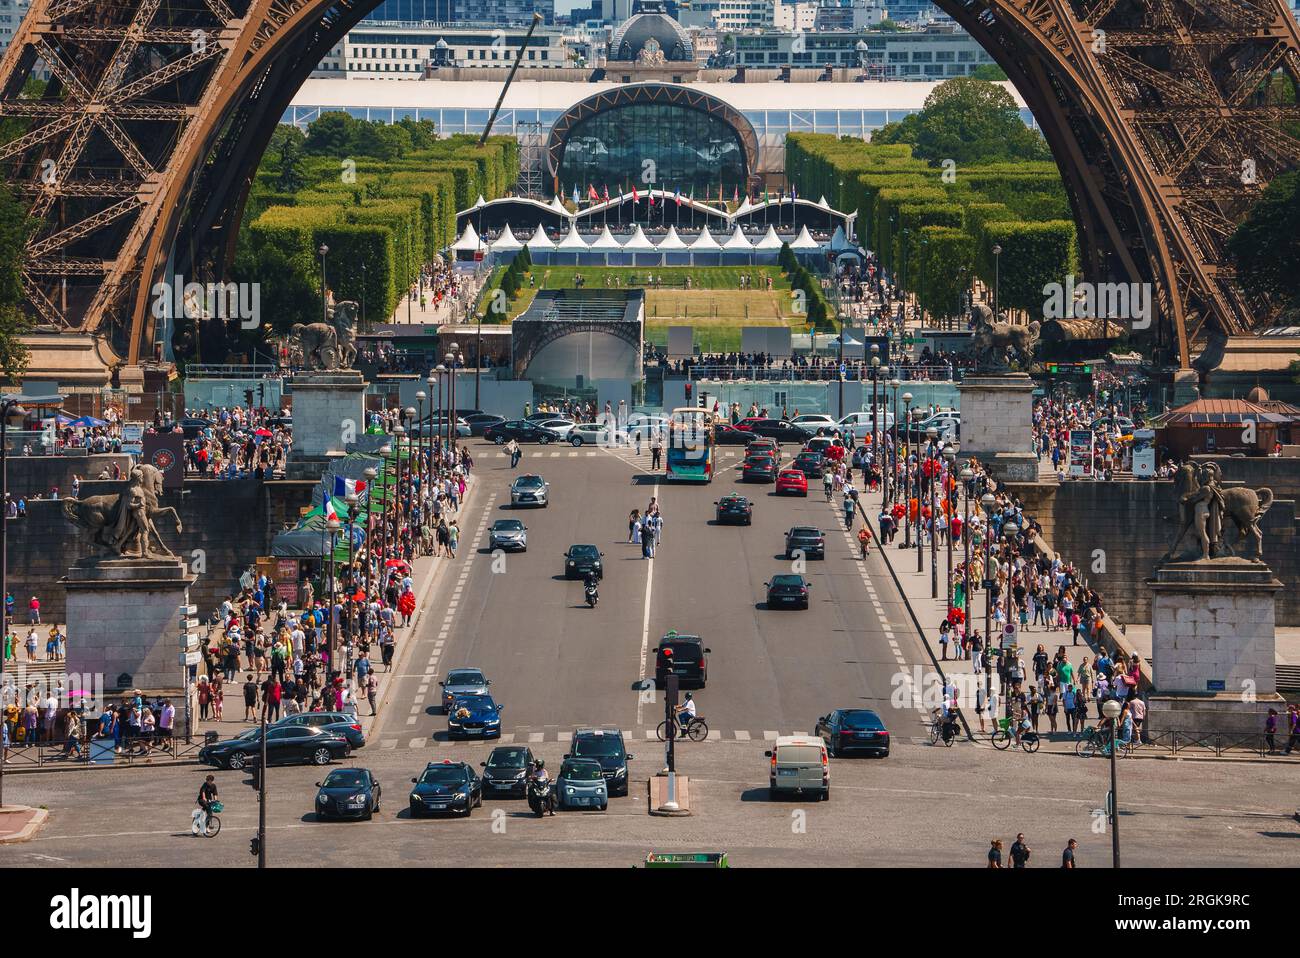 Sunny Summer Day at the Eiffel Tower, Paris Stock Photo